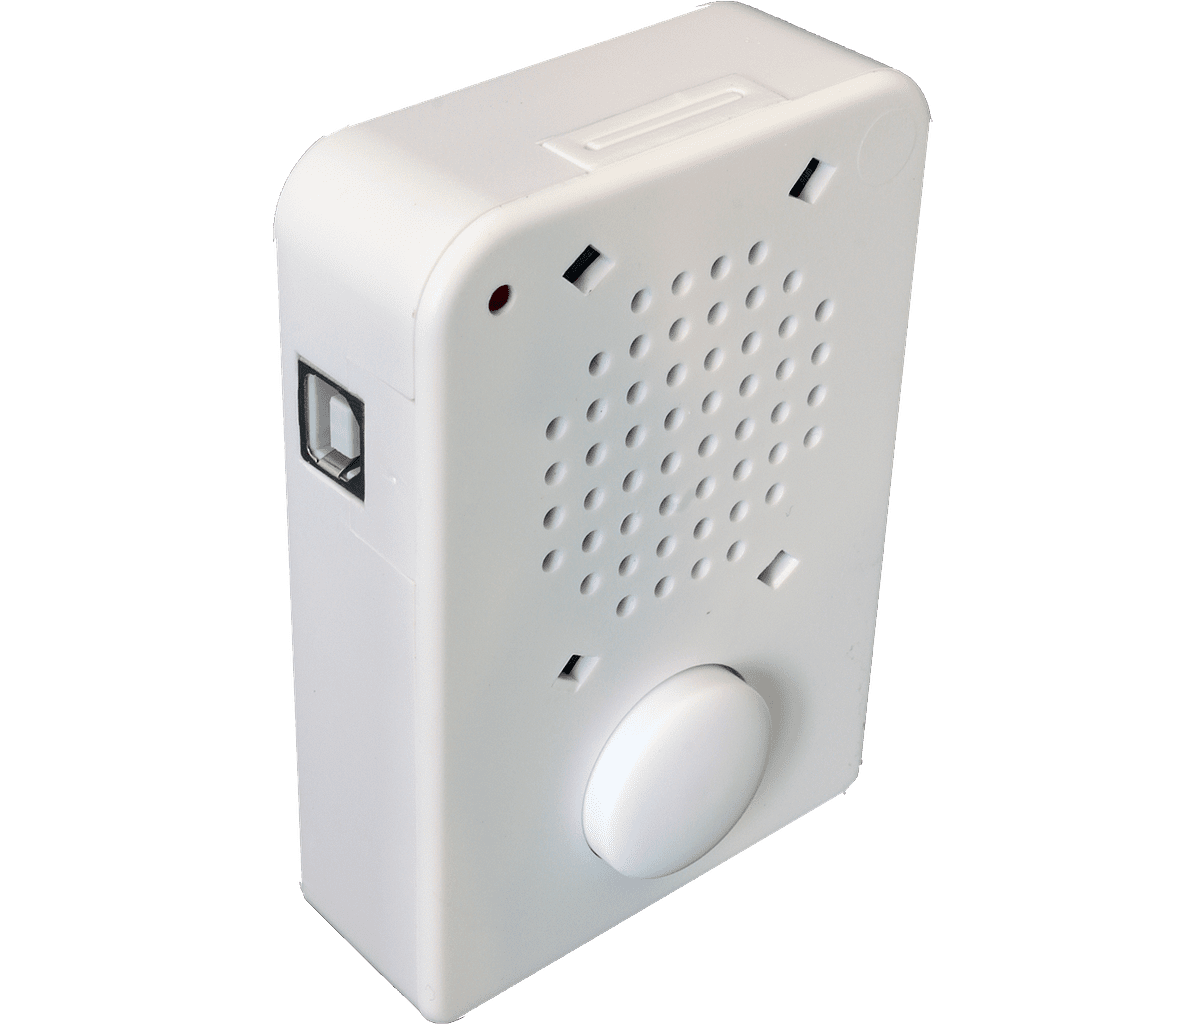 300 second USB recording module with PUSH-SWITCH and white enclosure 